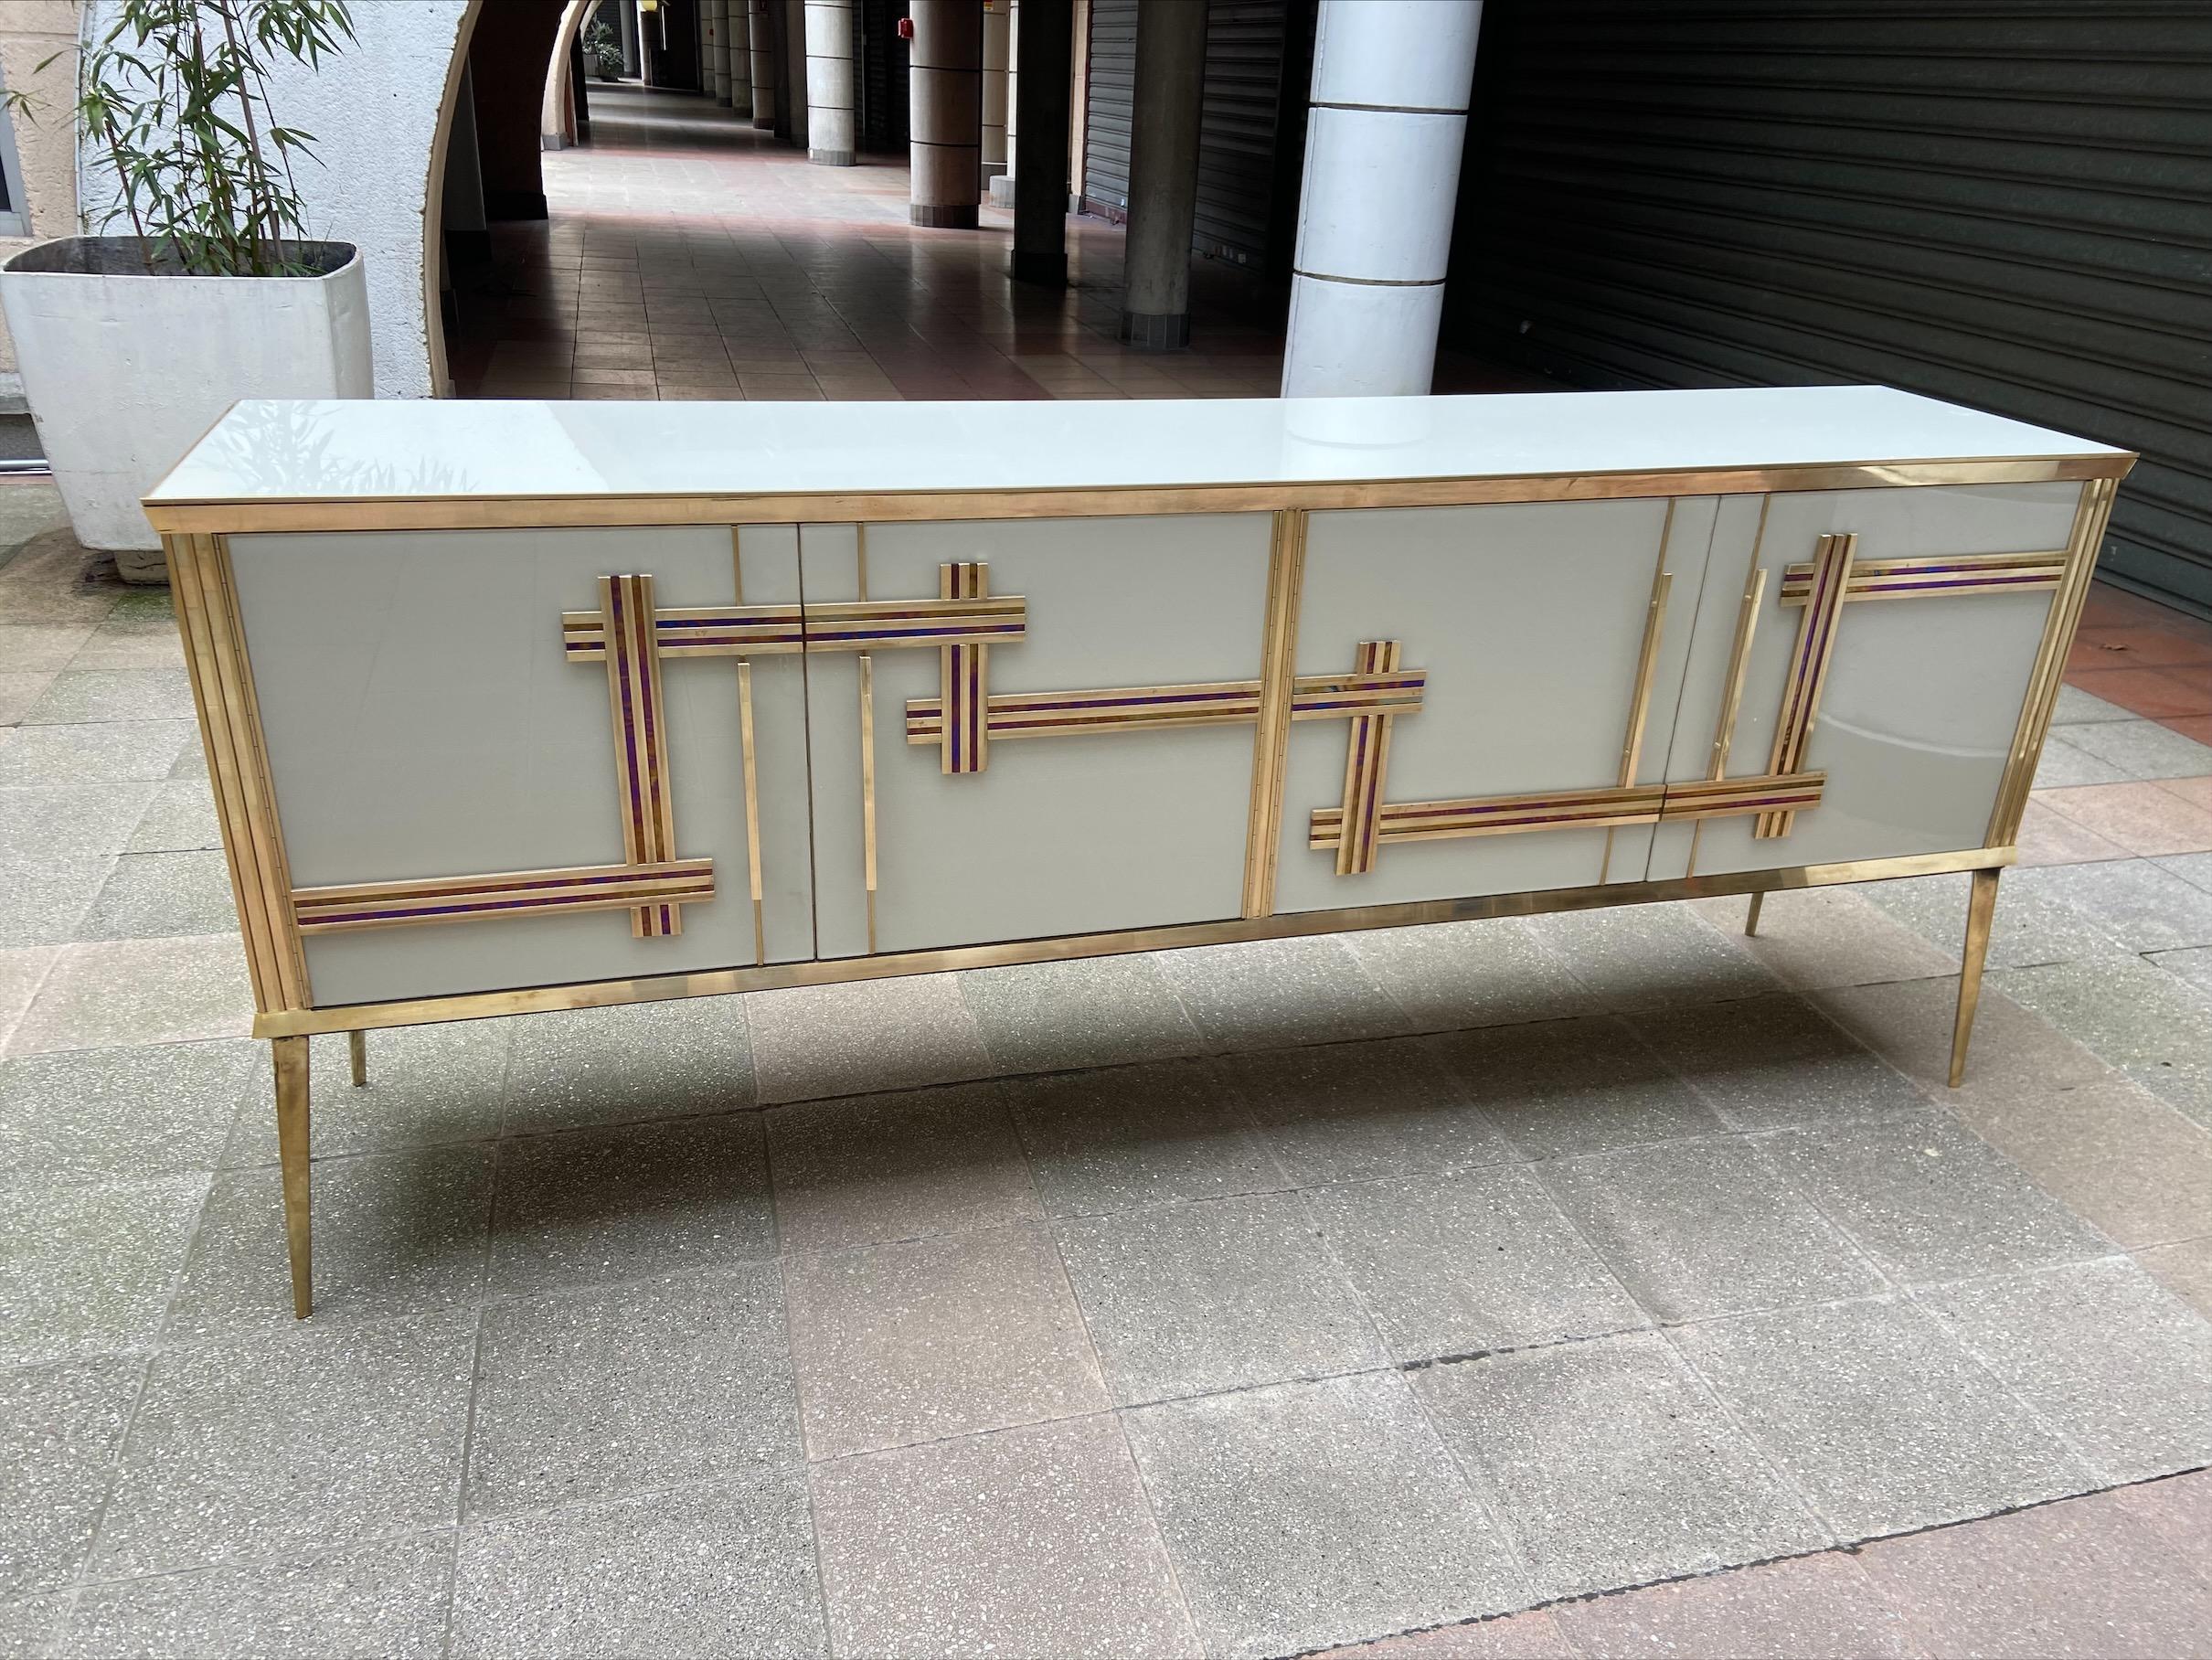 Sideboard - Northern Italy - Circa 1970

Glass and brass
In a perfect state
Measures: L 205 x D 44 x H 85 cm.